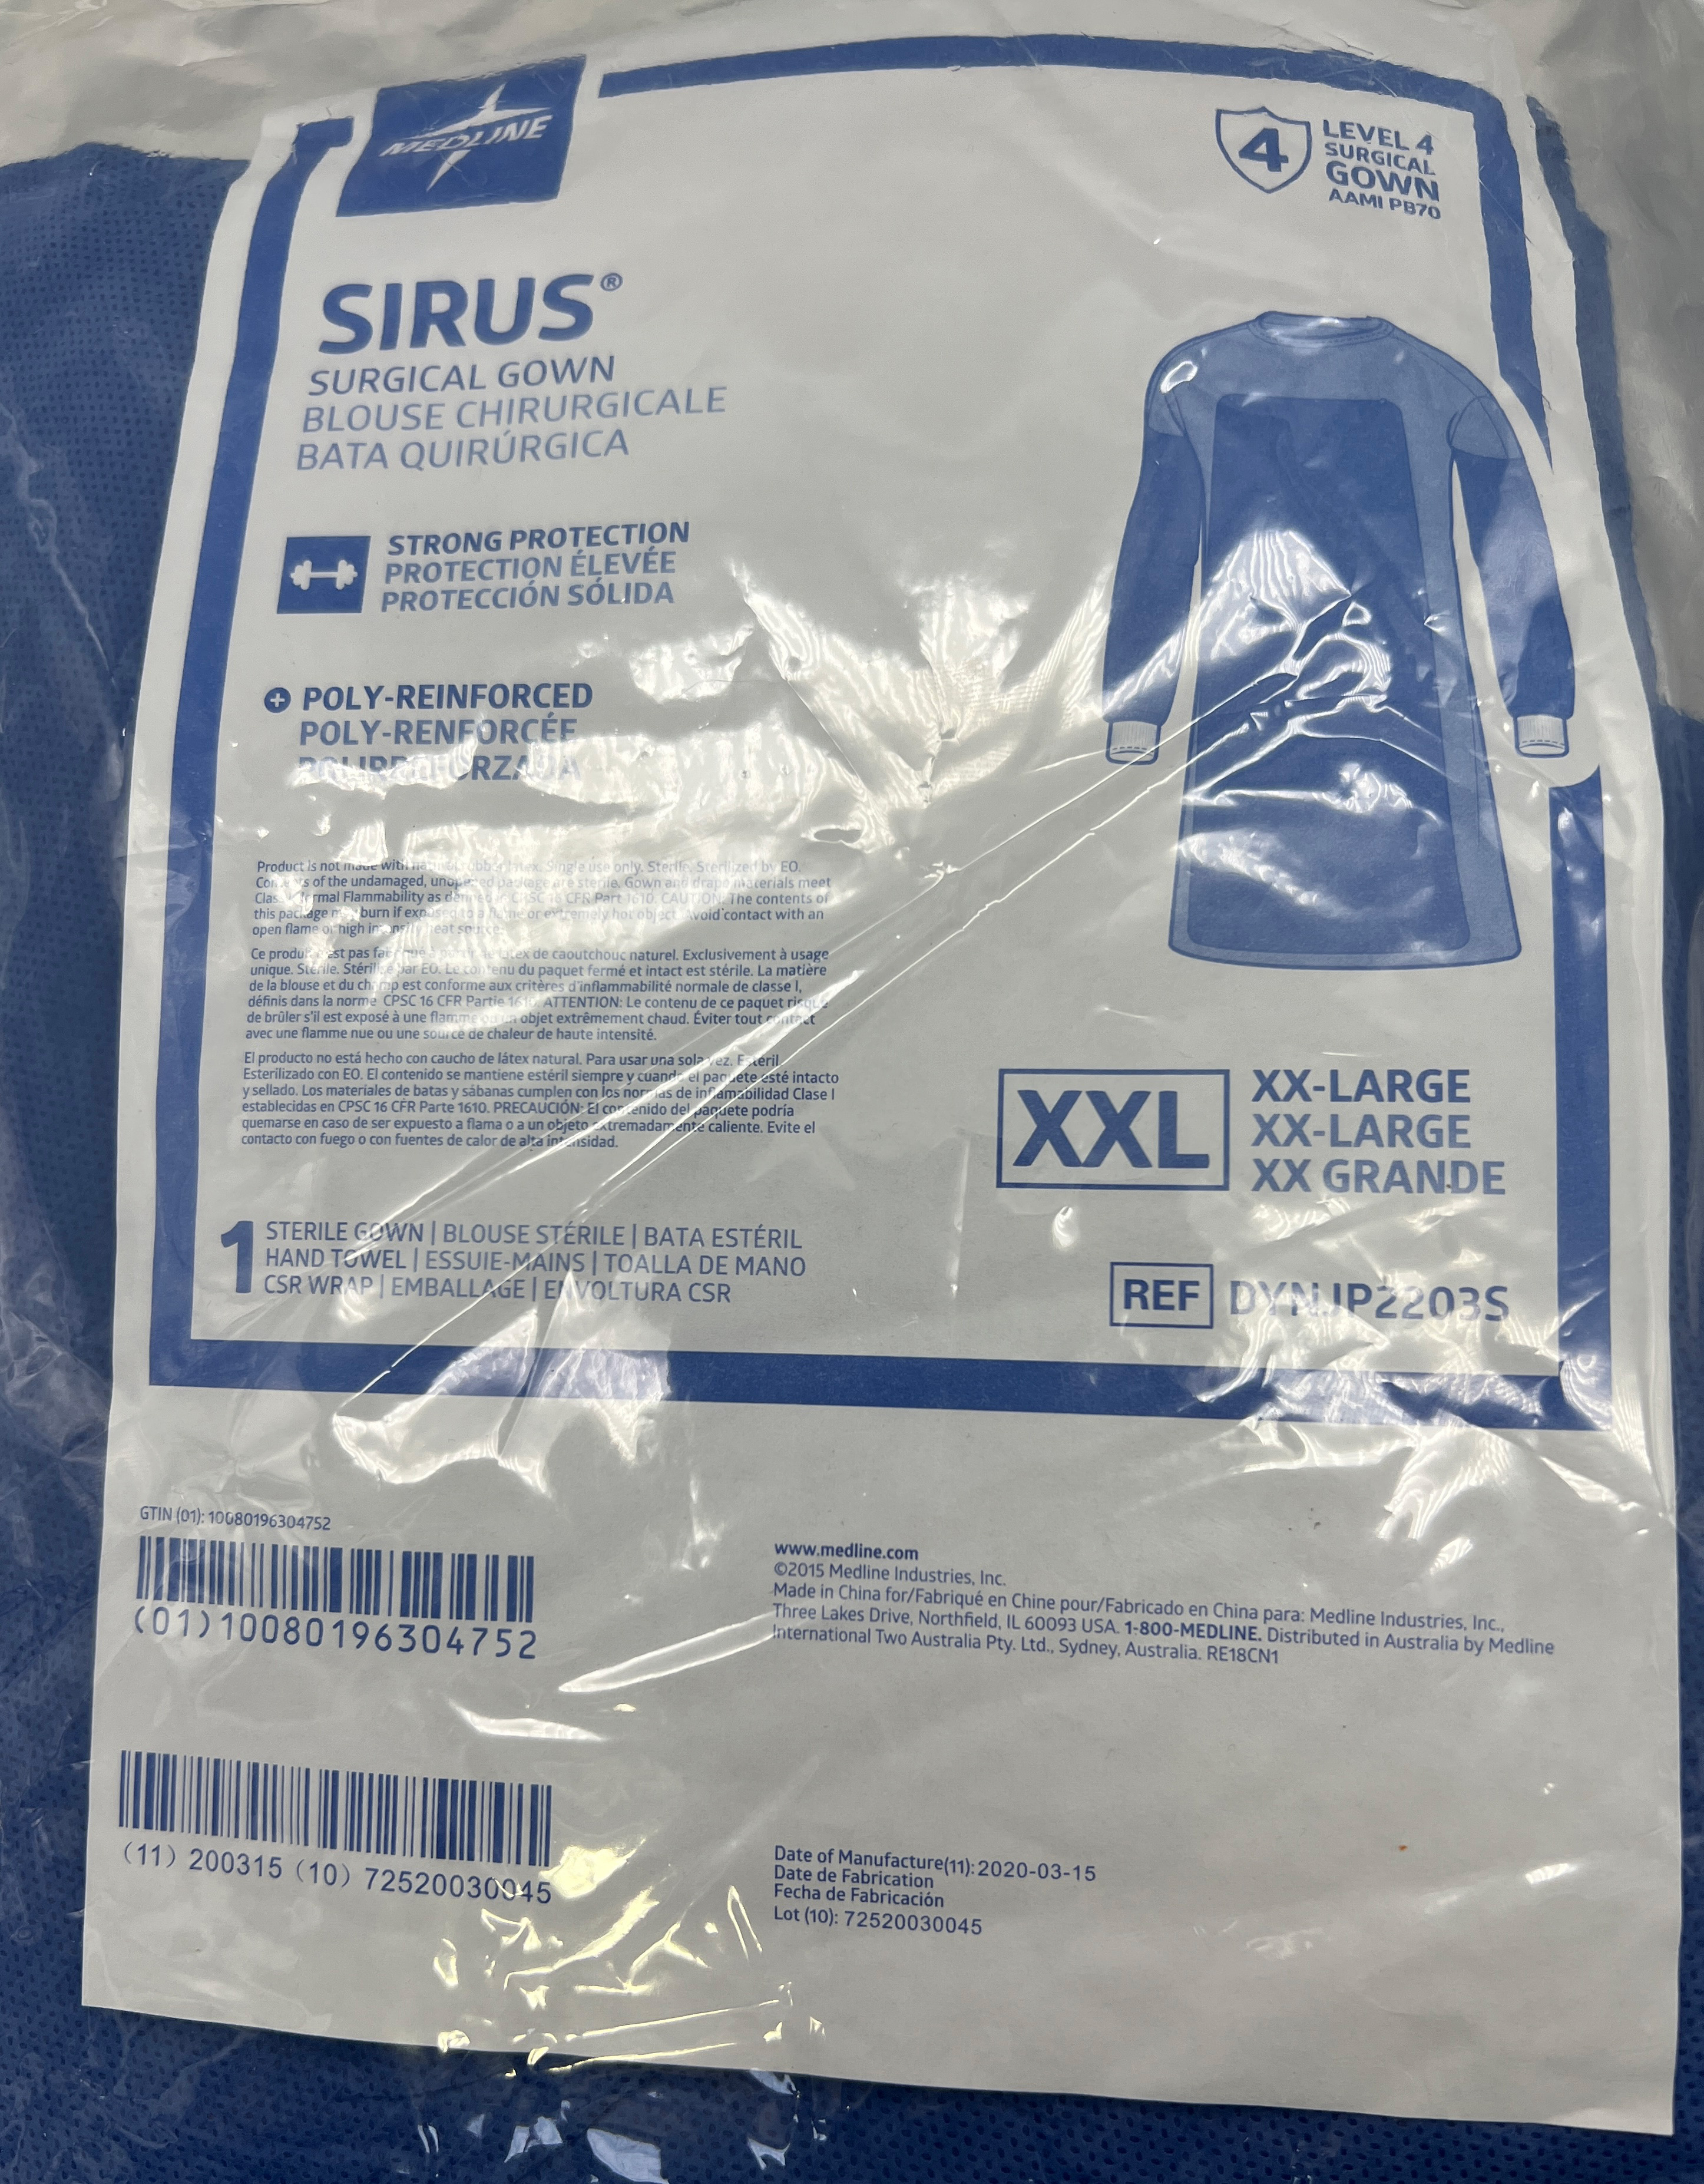 SIRUS SURGICAL GOWN, LEVEL 4